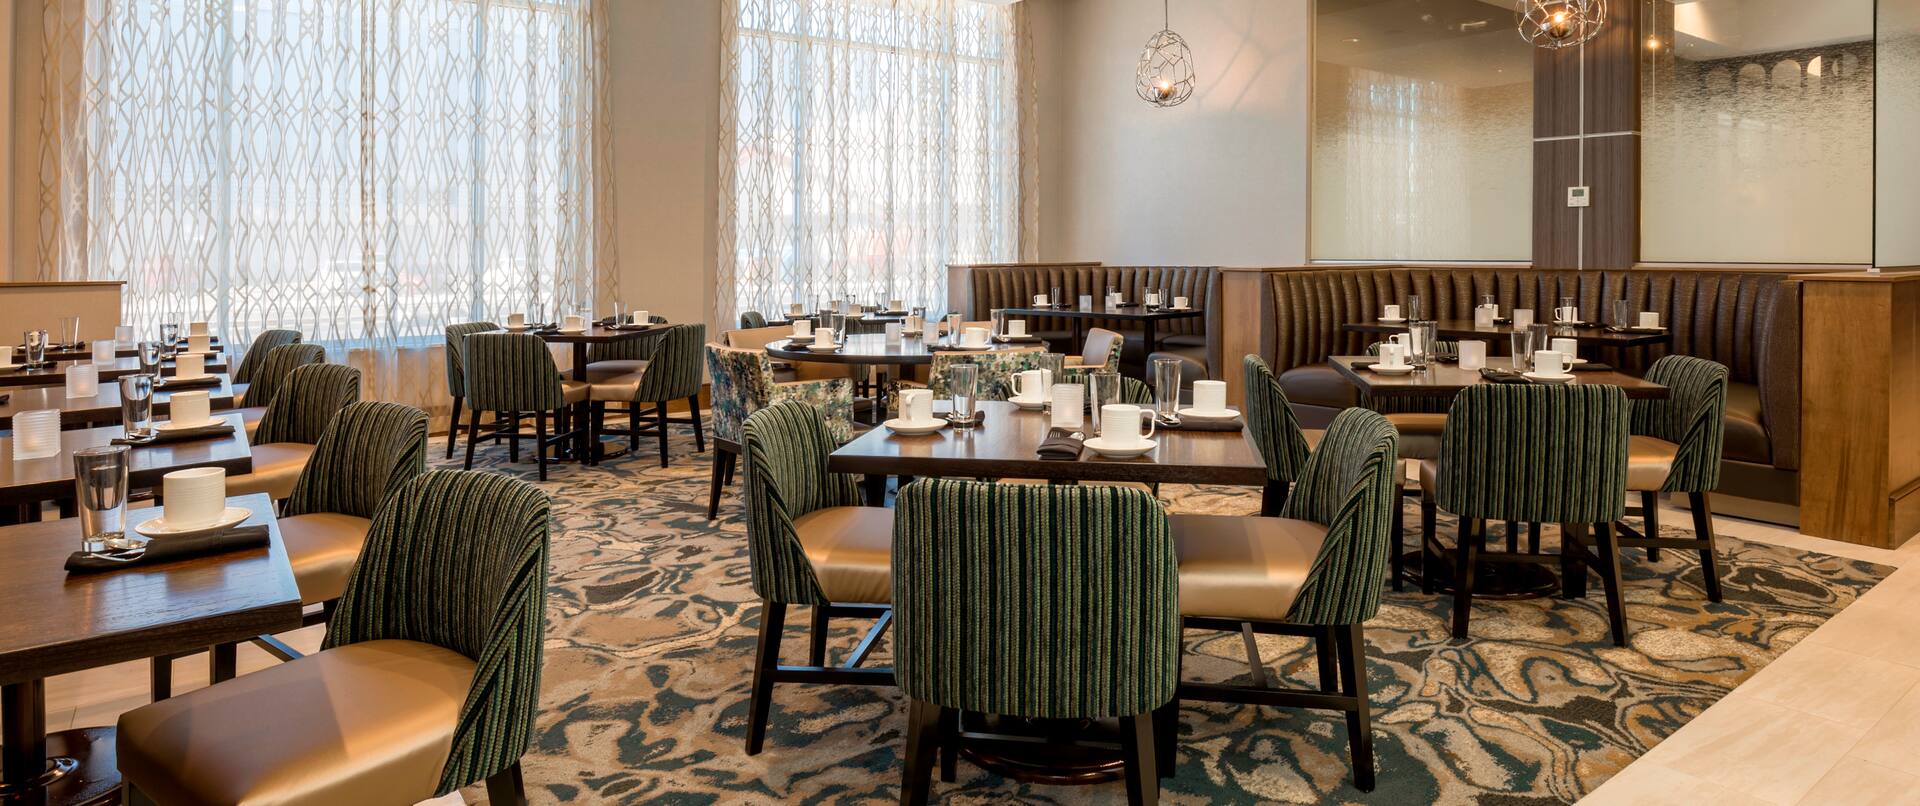 Place Settings on Tables, Chairs, Booth Seating, and Large Windows With Sheer Drapes in Stone City Grill Dining Area